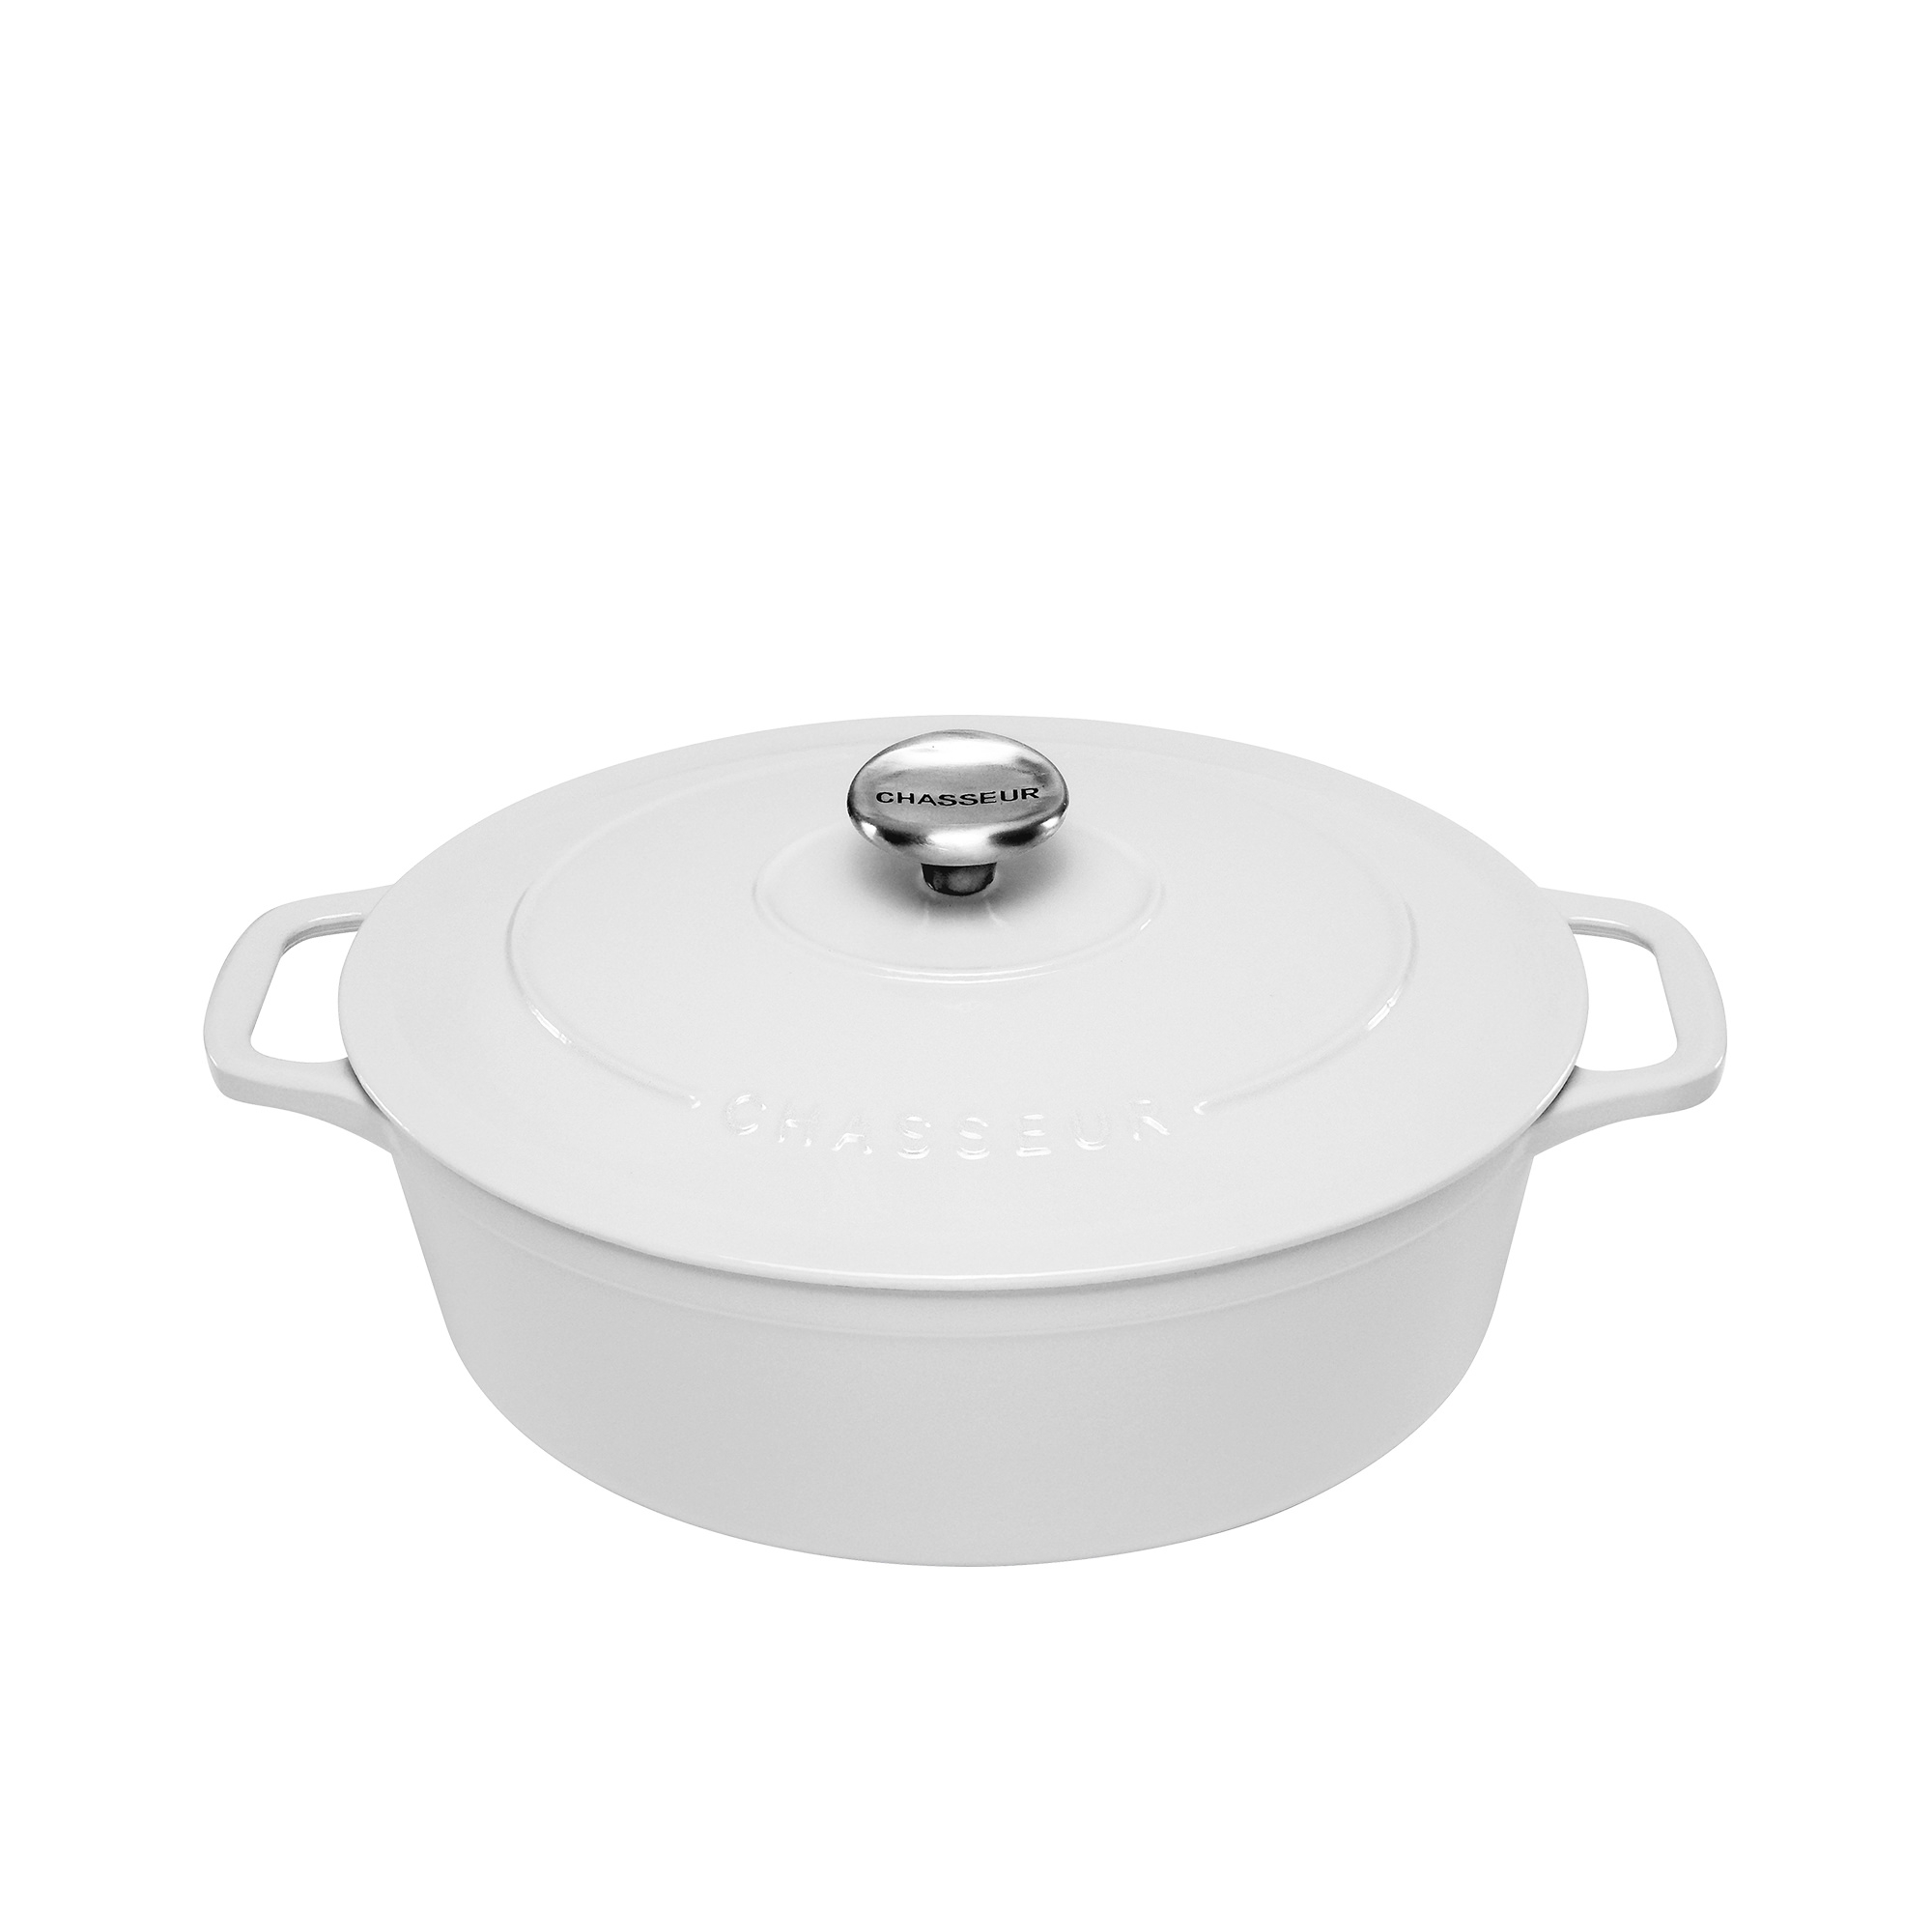 Chasseur Oval French Oven 27cm - 4L Brilliant White Image 1